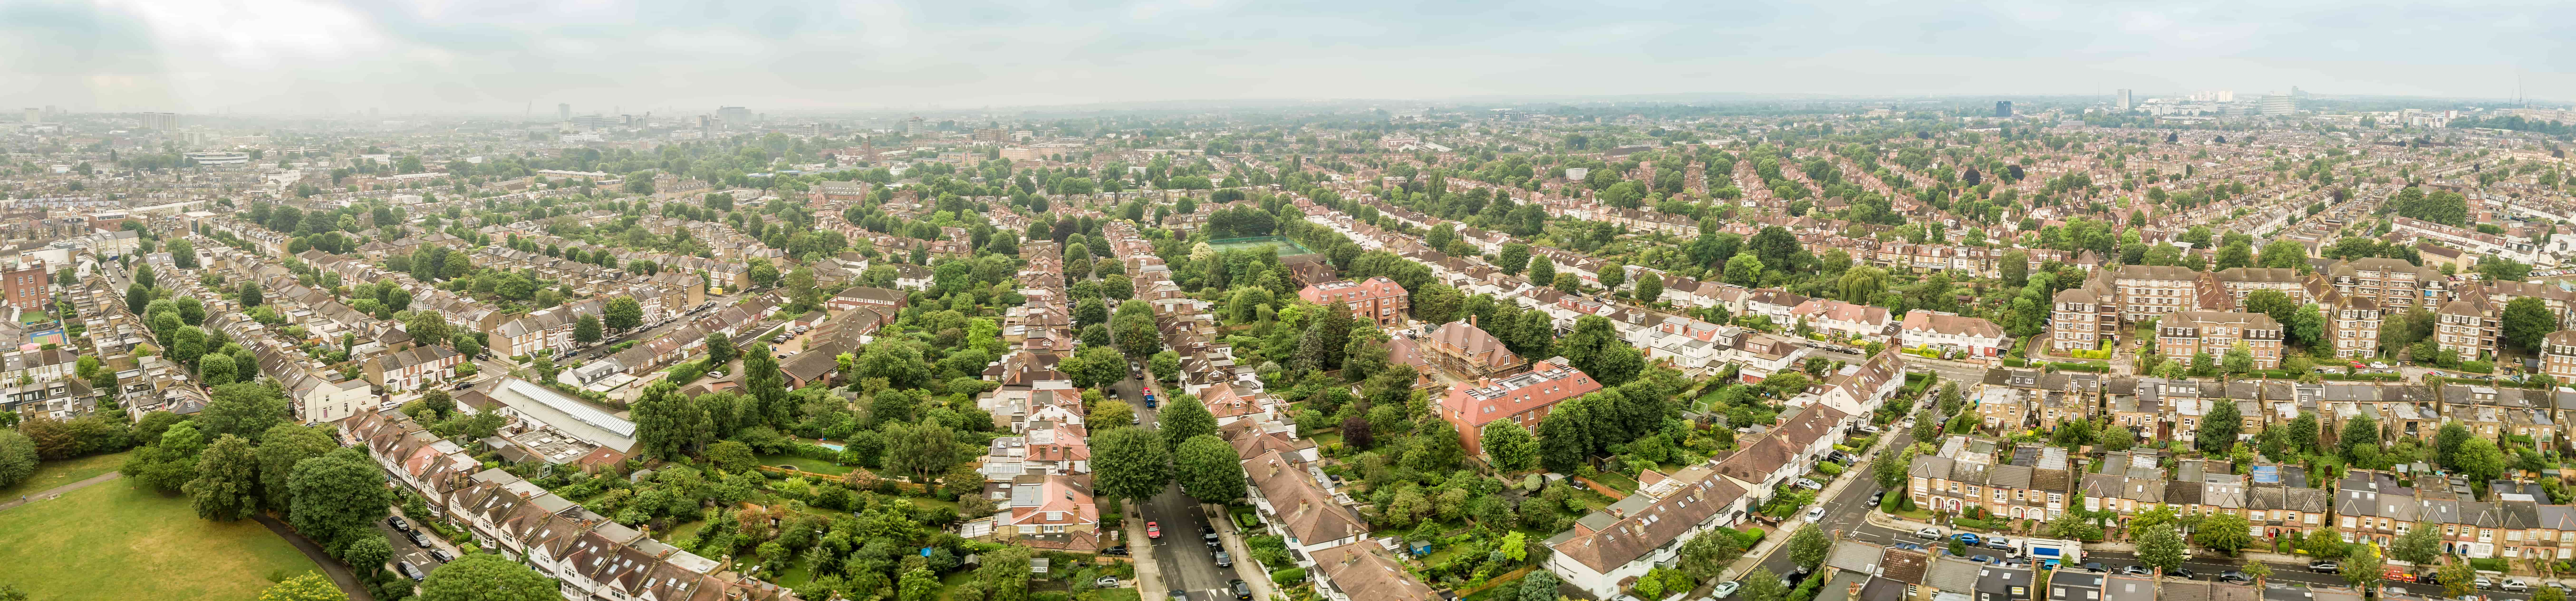 aerial view of London suburb, England